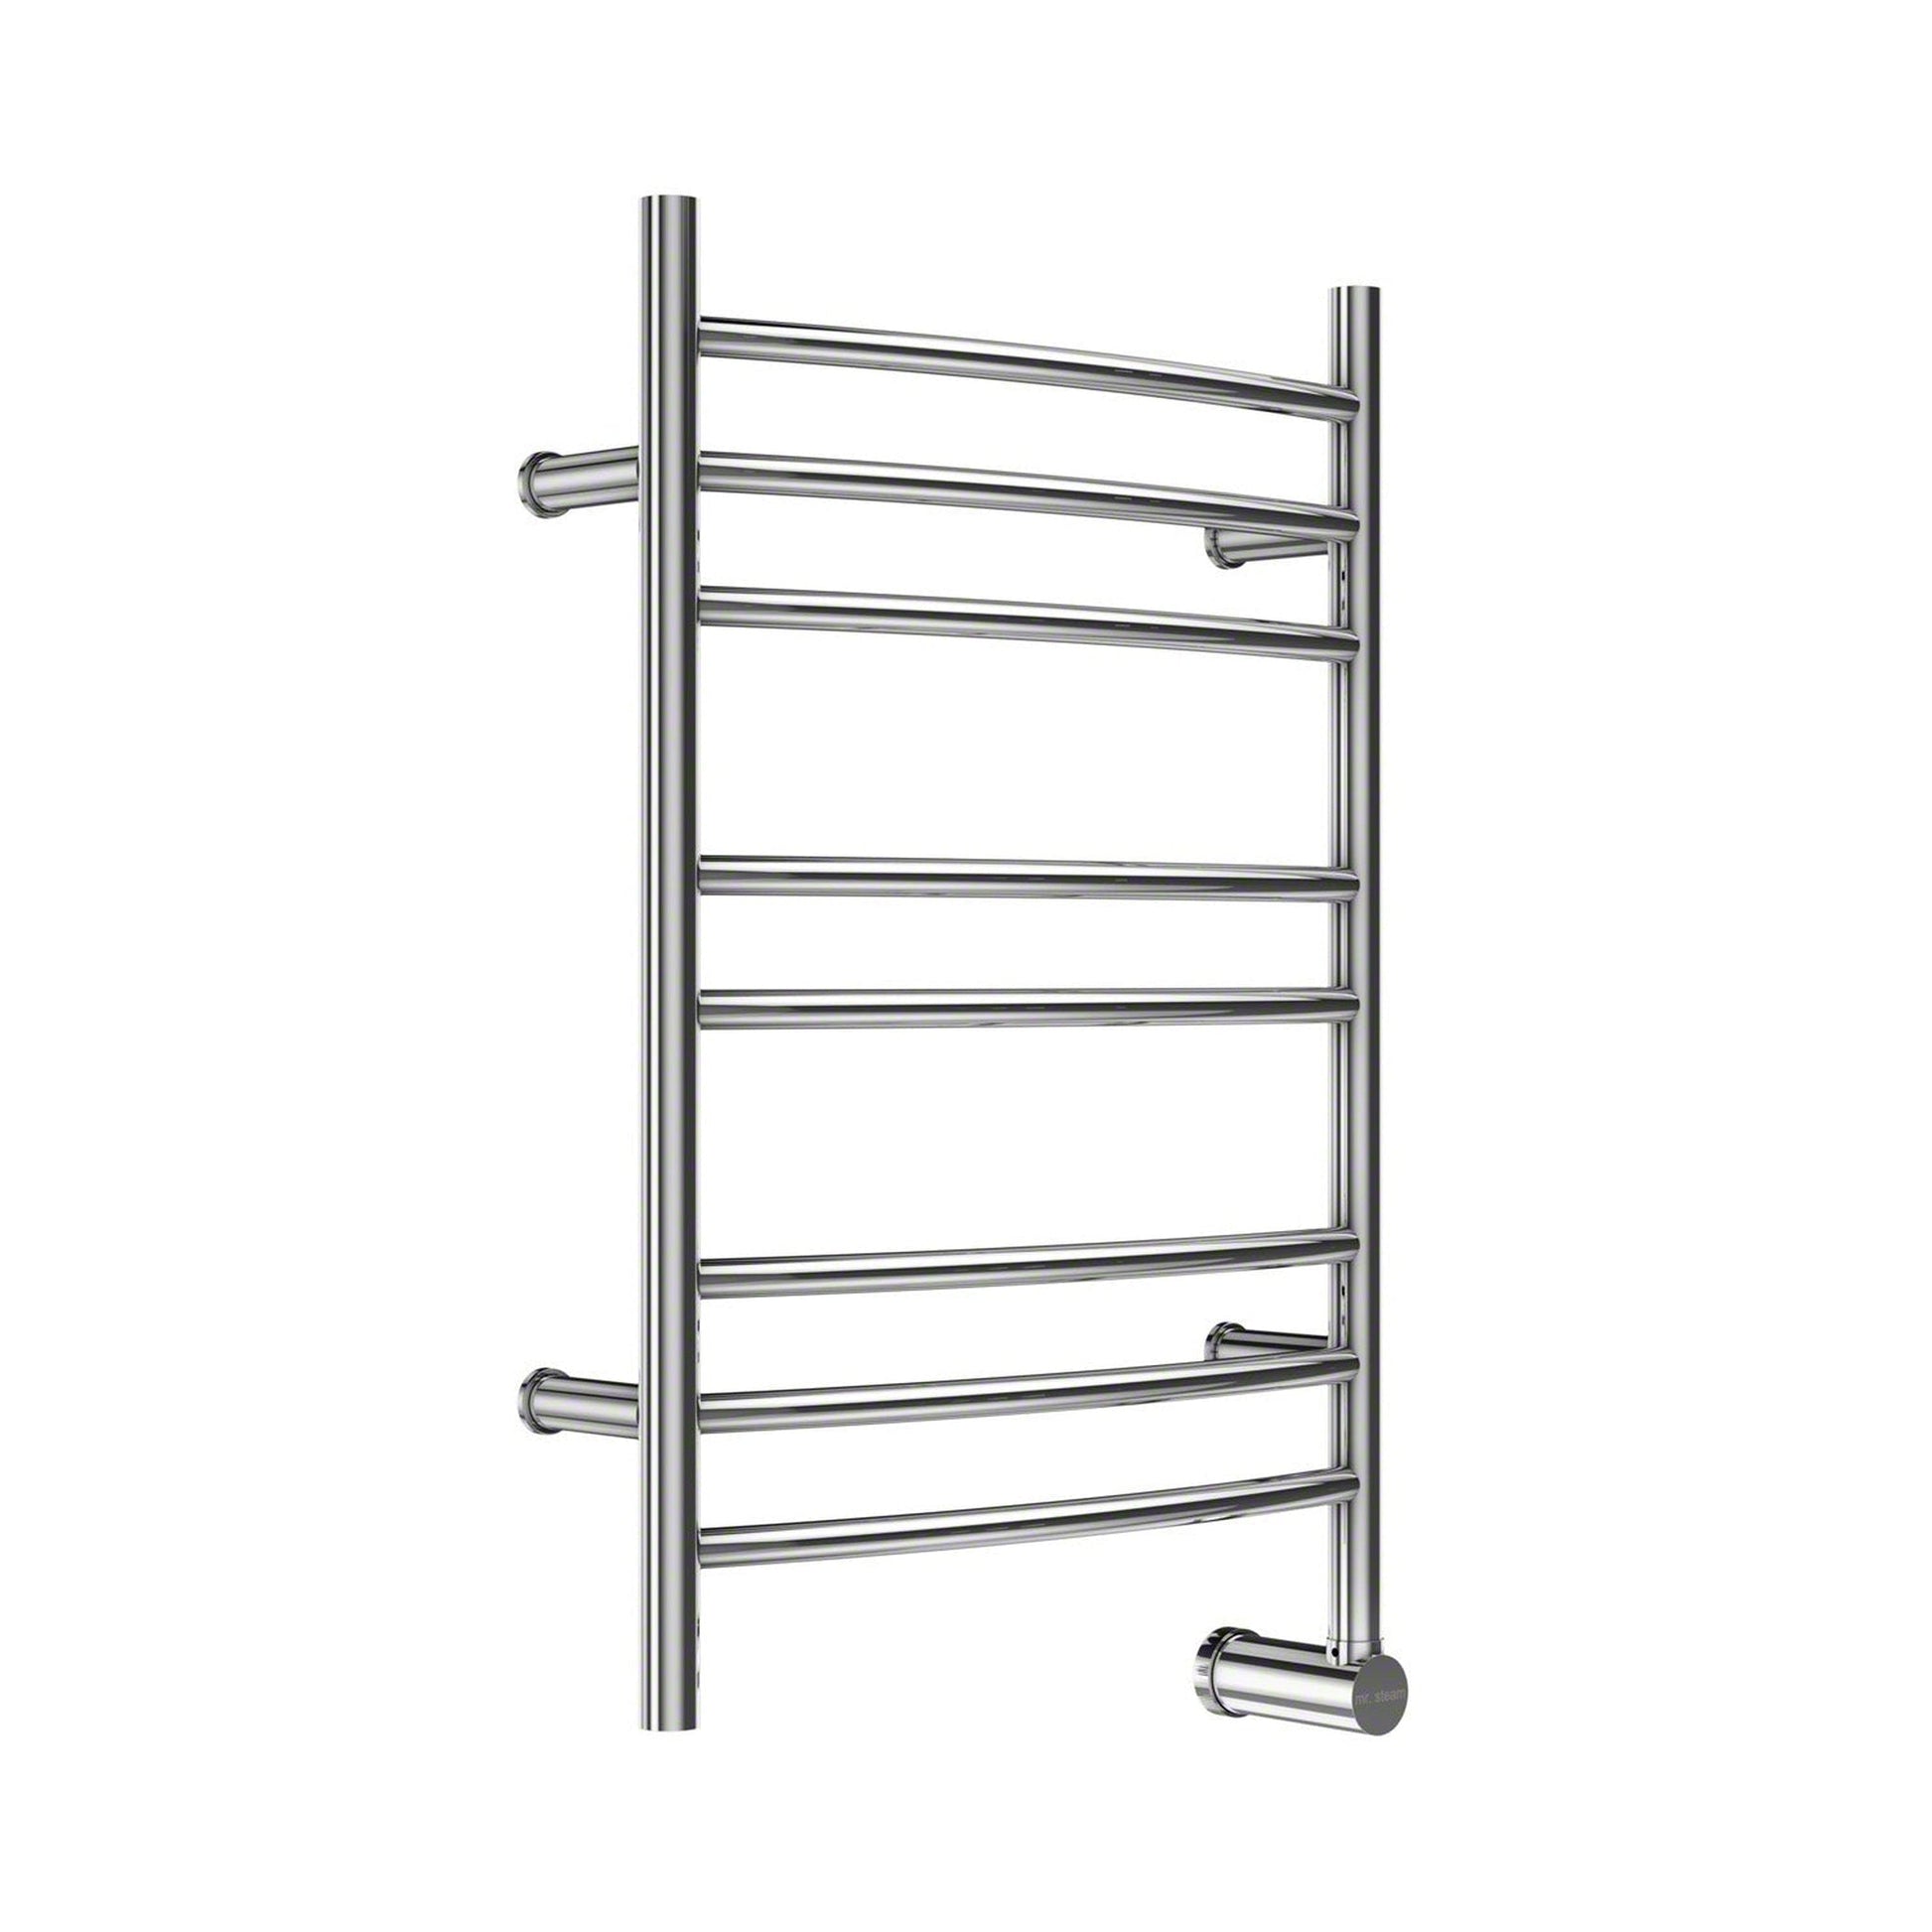 MrSteam Metro Collection 31" x 20" x 5" Stainless Steel Brushed in 8-Bar Wall-Mounted Electric Towel Warmer with Digital Timer